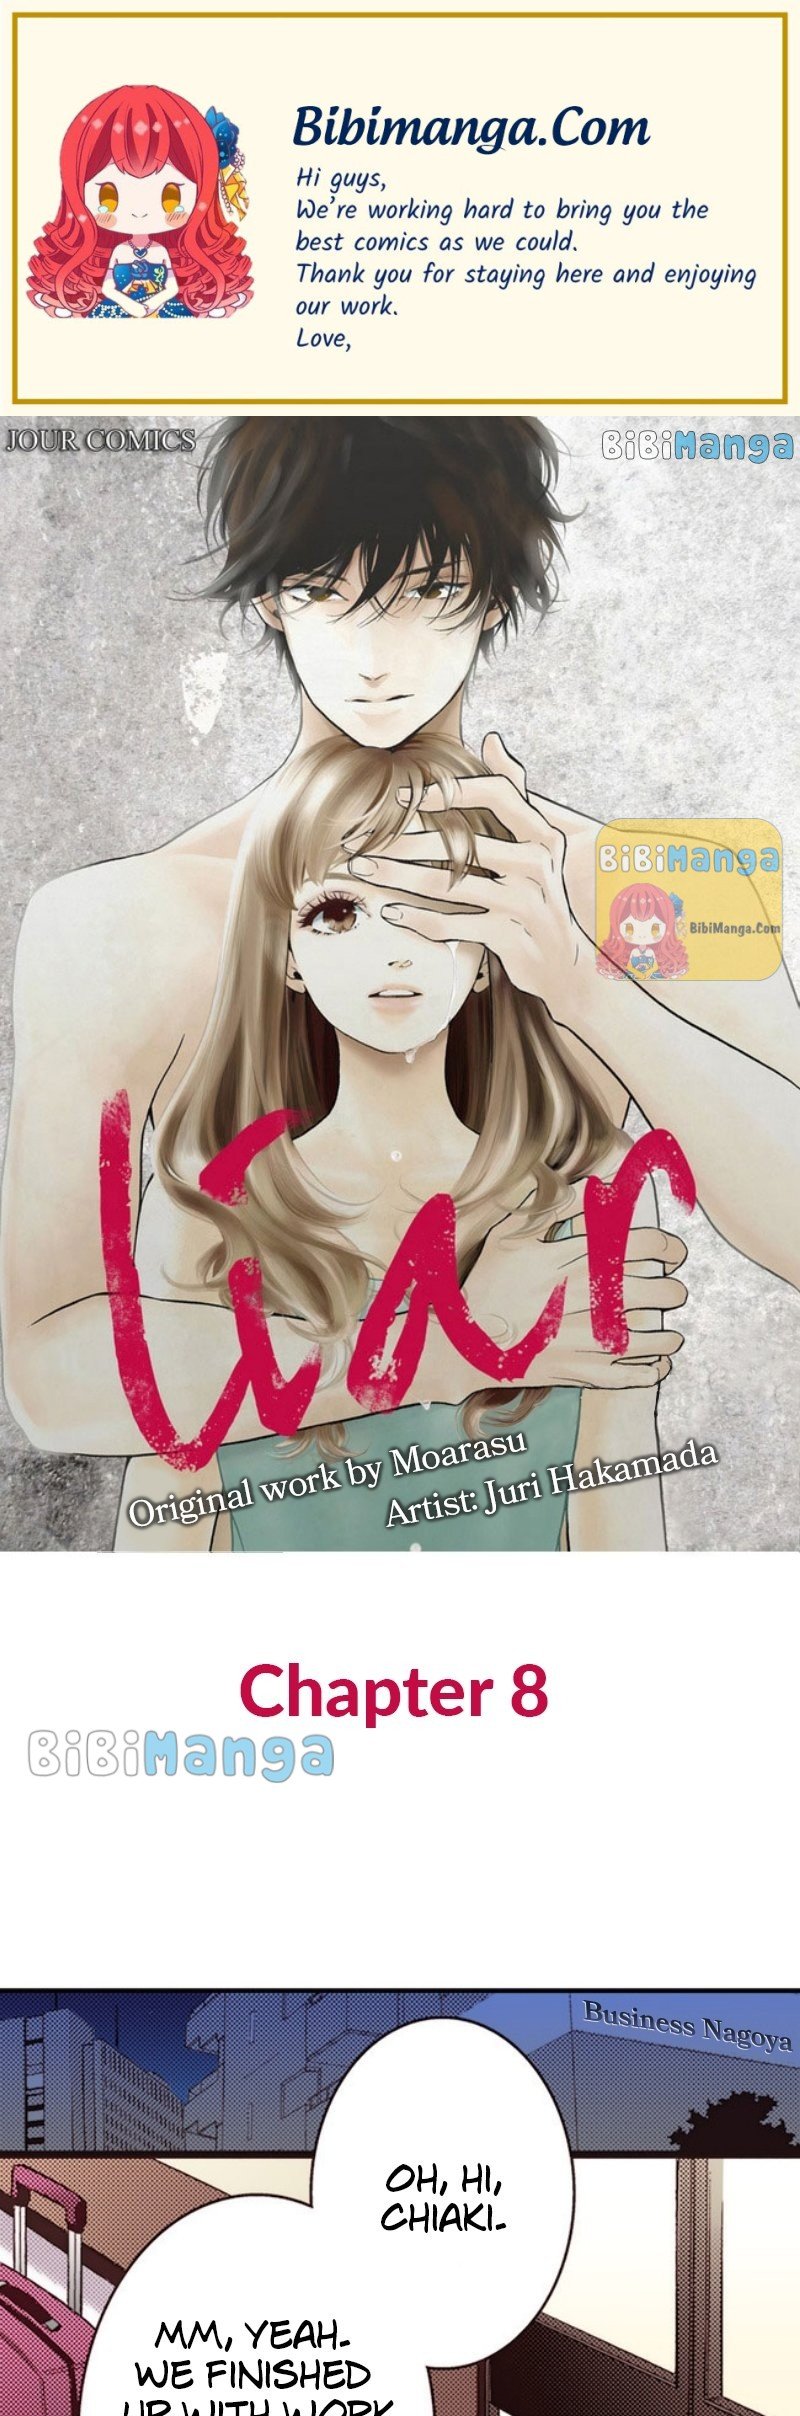 Liar chapter 8